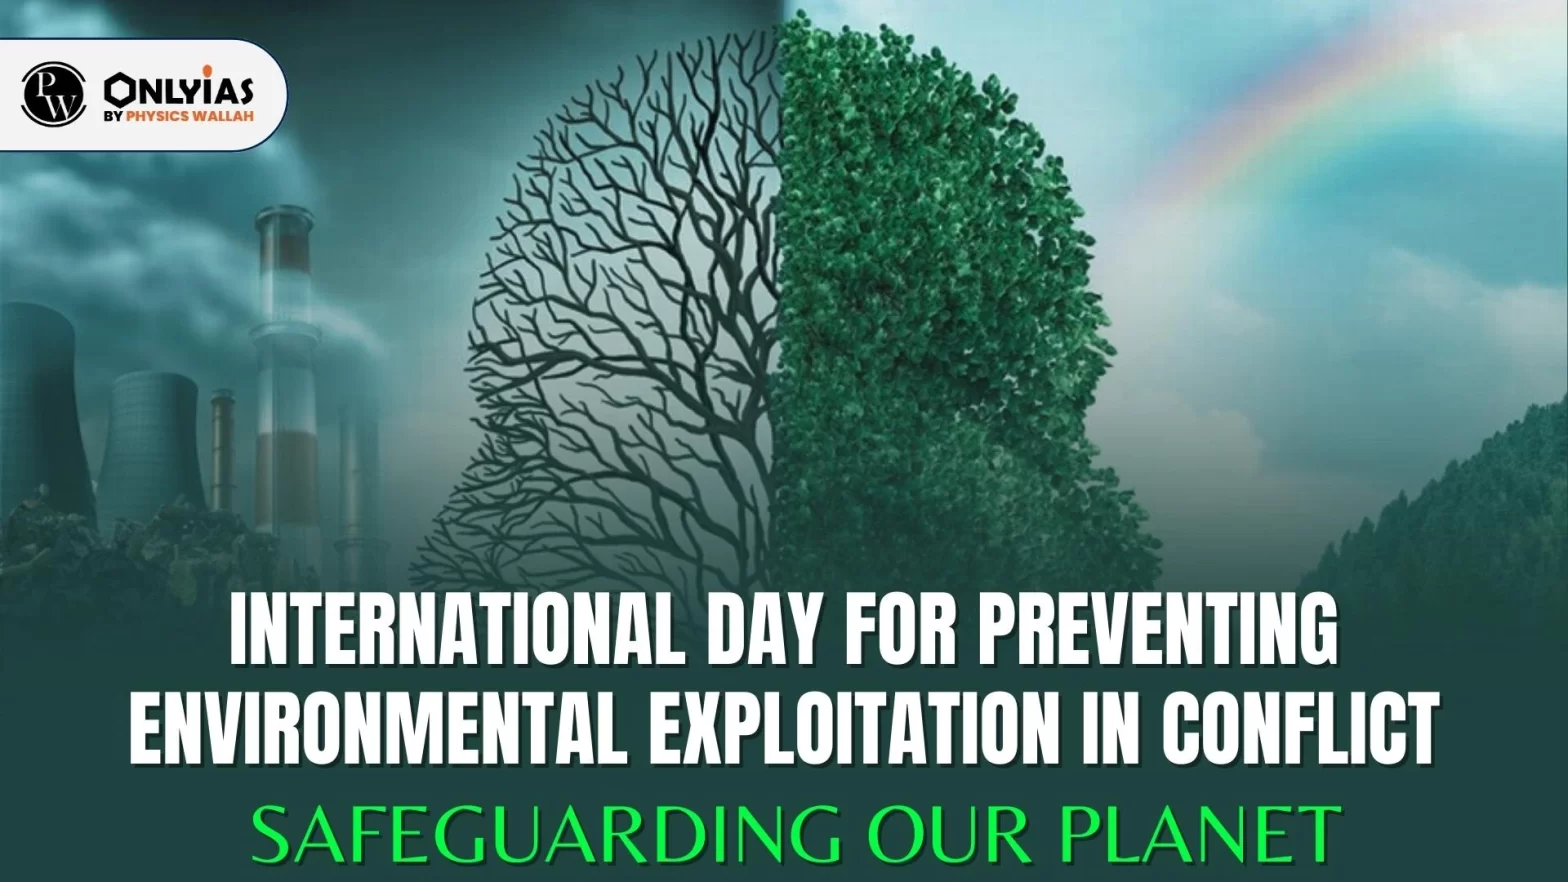 International Day for Preventing Environmental Exploitation in Conflict – Safeguarding Our Planet